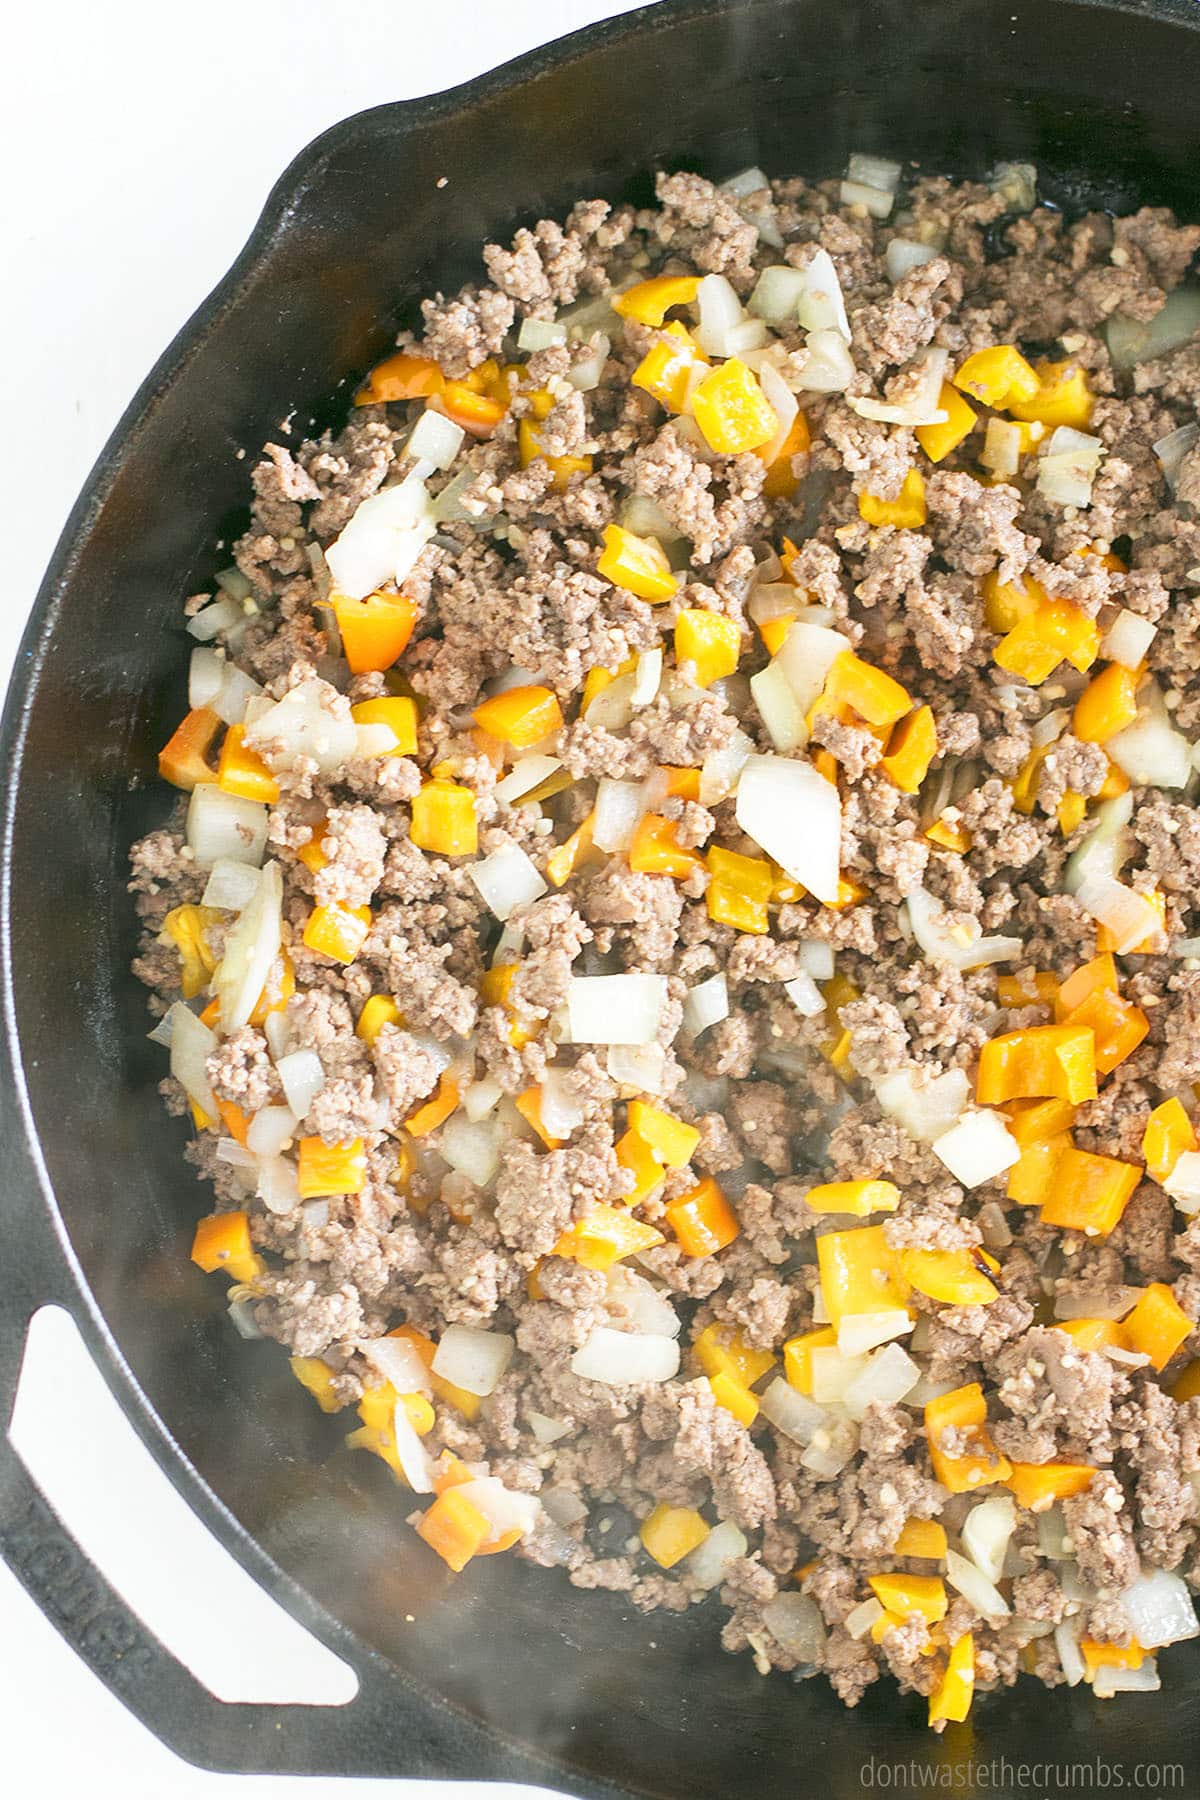 Ground beef and other ingredients for a beef tamale pie in a cast iron skillet